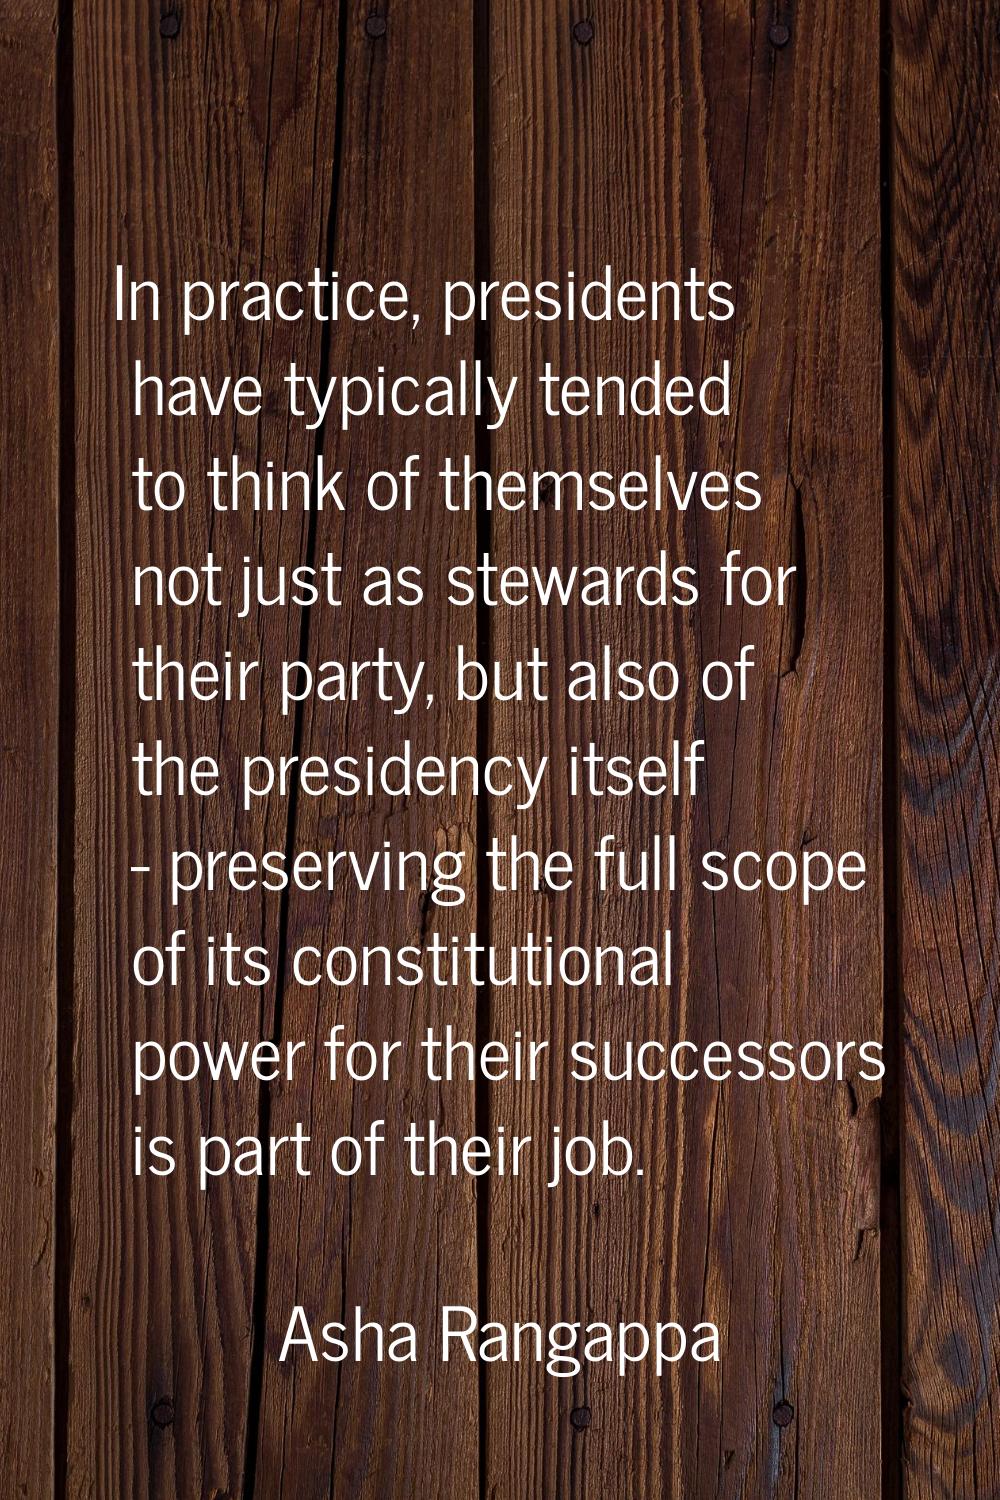 In practice, presidents have typically tended to think of themselves not just as stewards for their